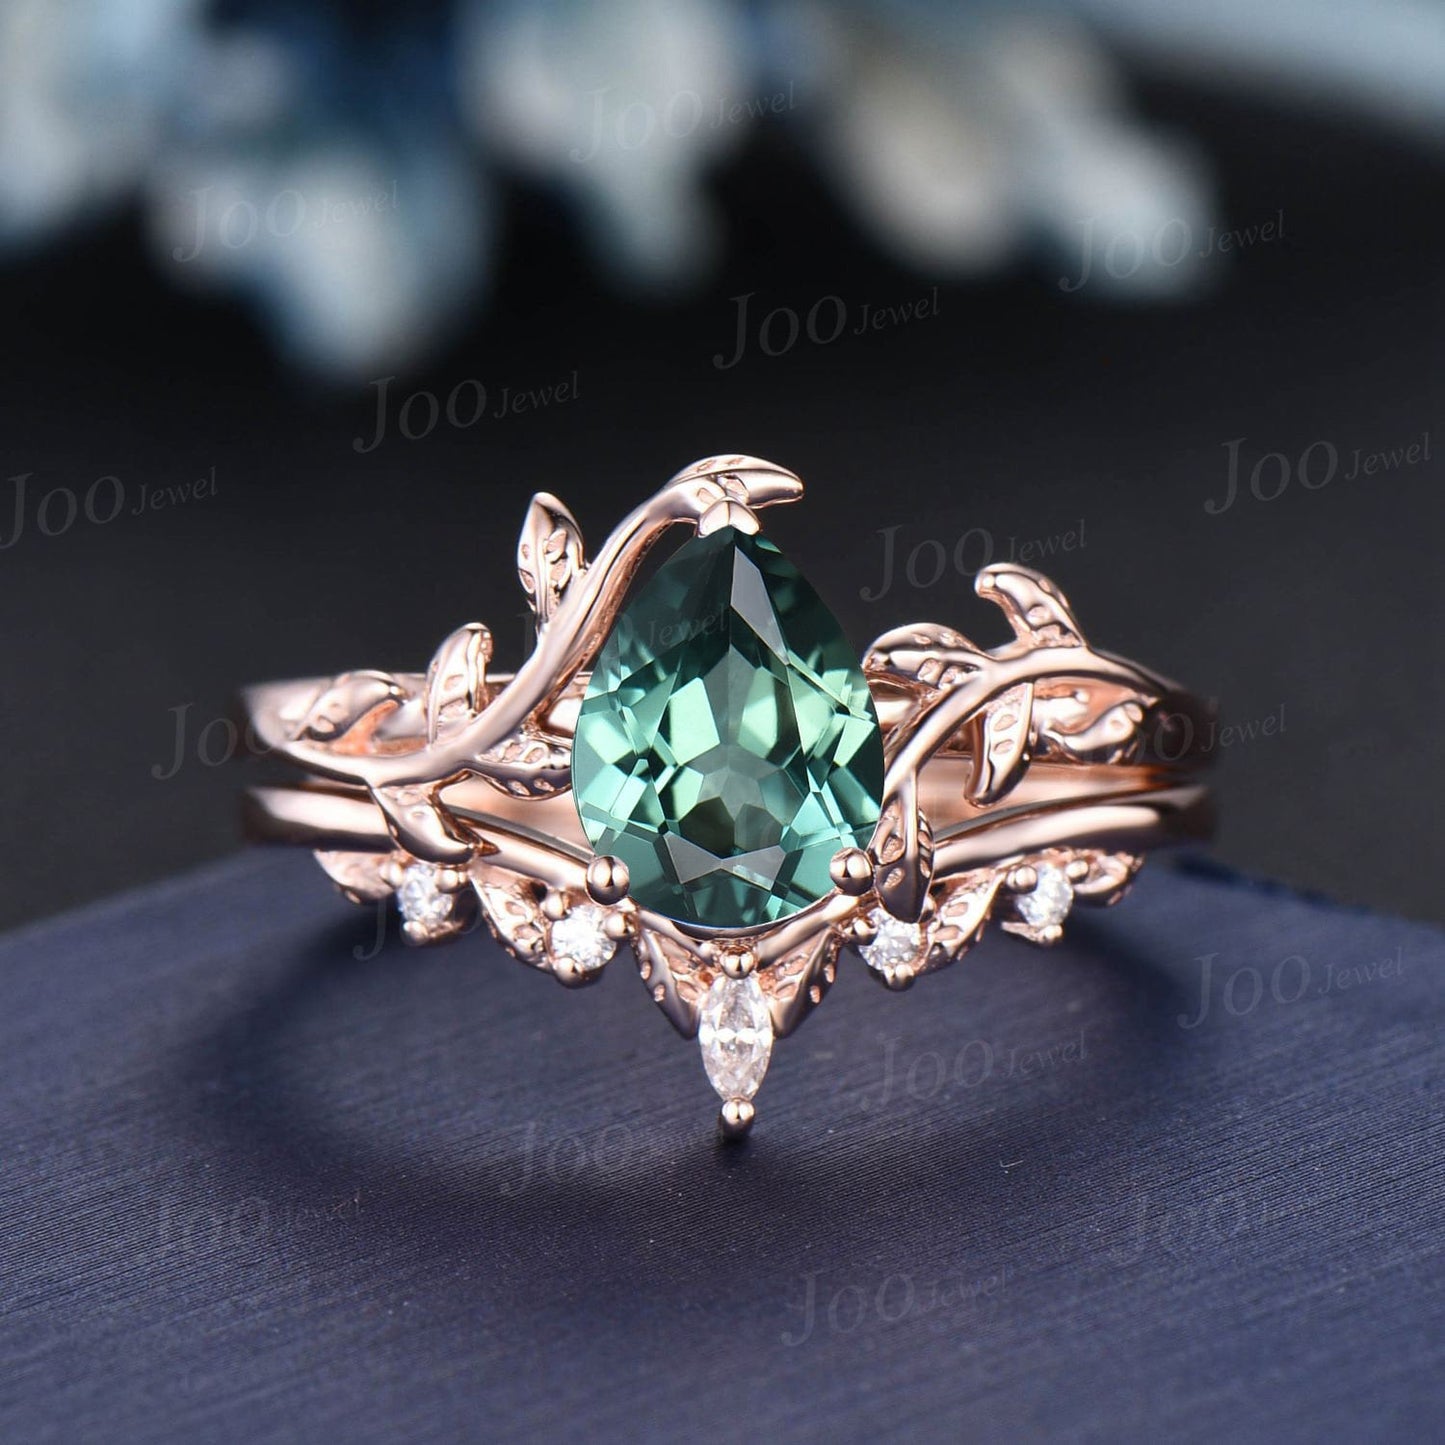 1.25ct Pear Green Sapphire Diamond Ring Set Nature Inspired Teal Montana Sapphire Engagement Ring Rose Gold Leaf Vine Branch Solitaire Ring